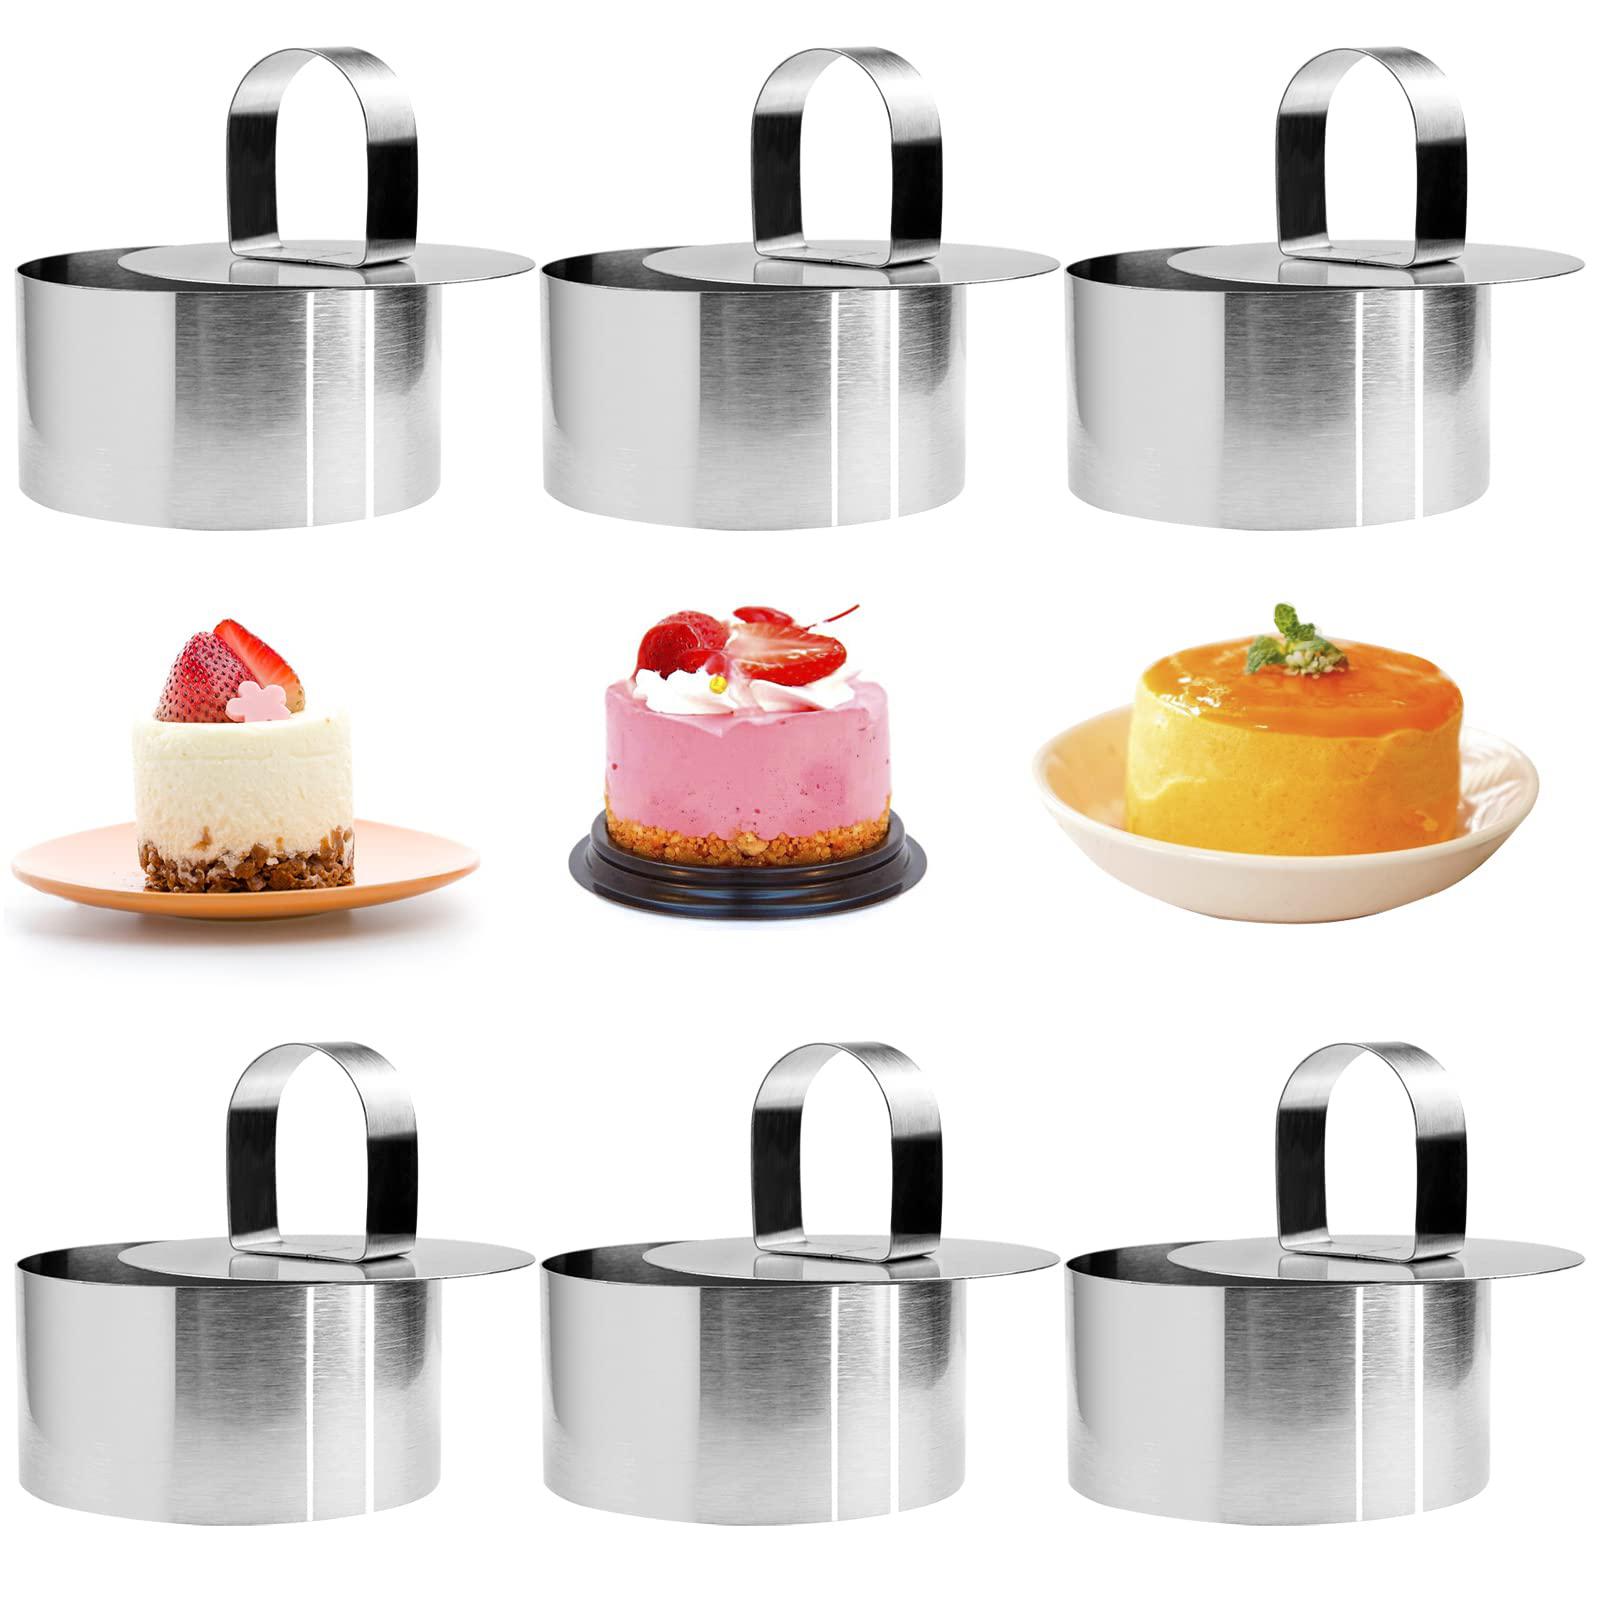 \'\'N/A\'\' 6 pieces round cake ring mold, 3 inch stainless steel mousse mould, mini pancake pastry dessert baking ring mold